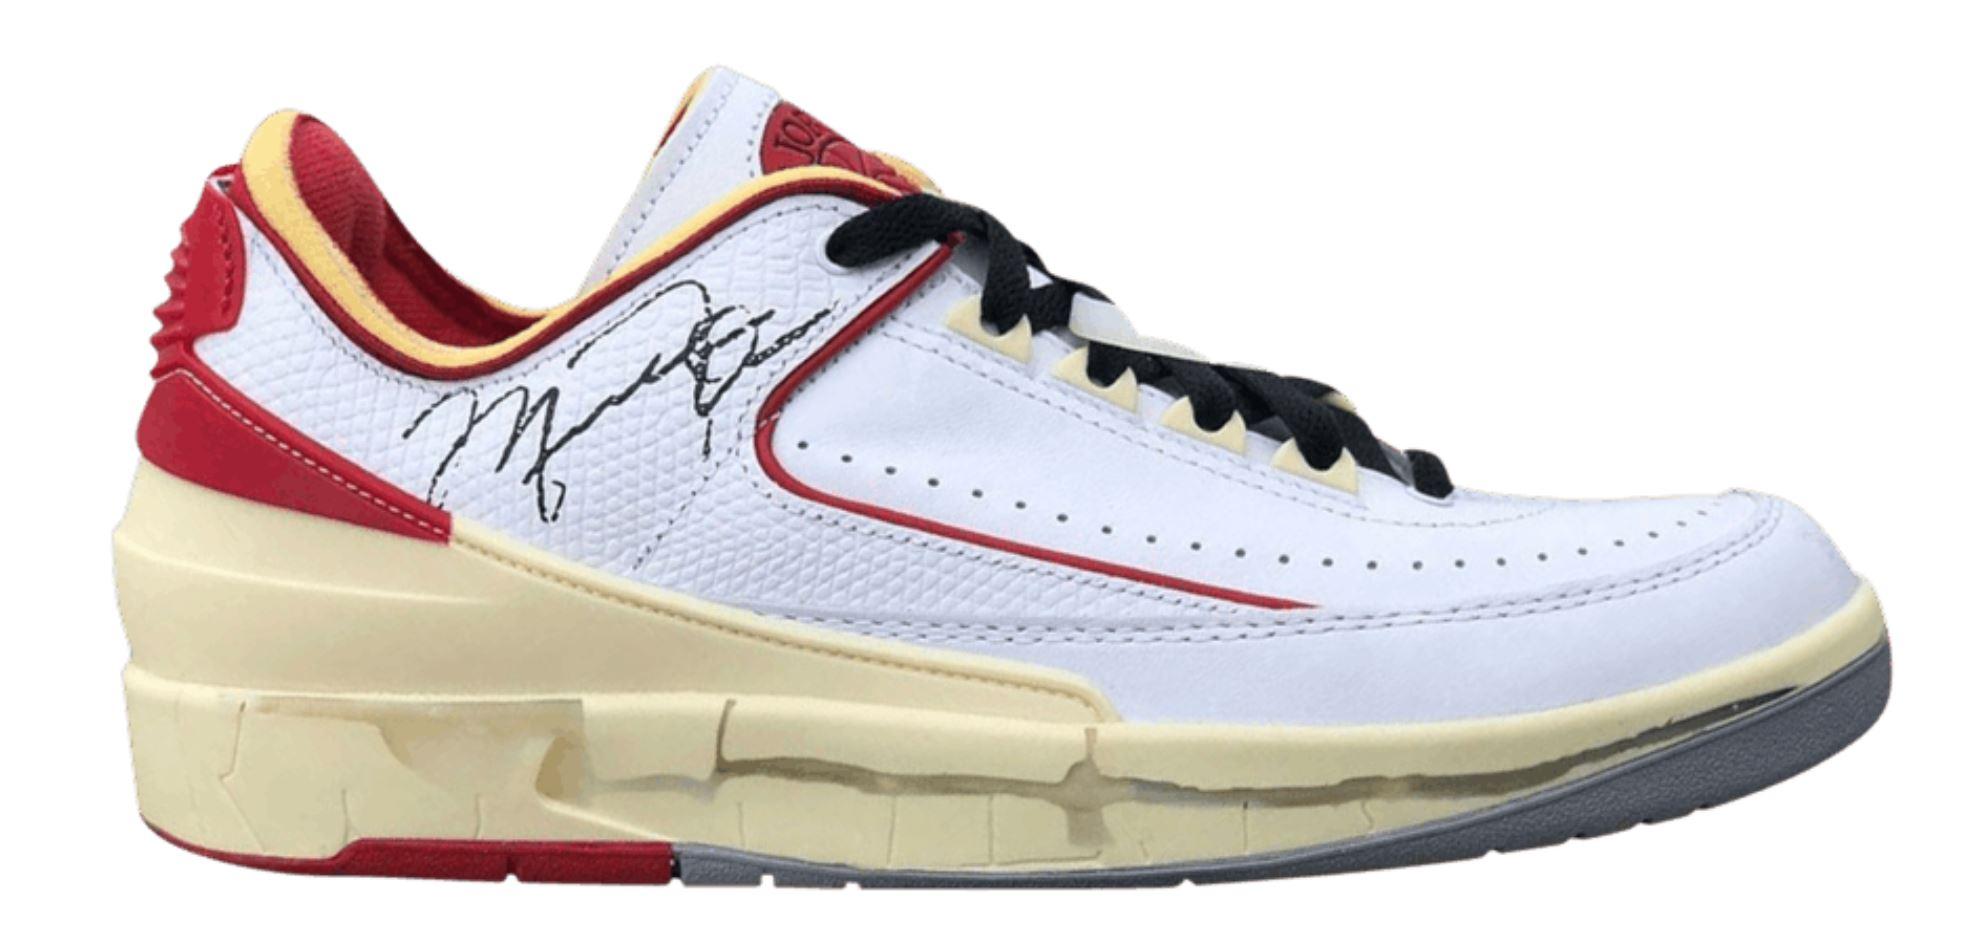 Air Jordan 2 Size Chart and Fitting